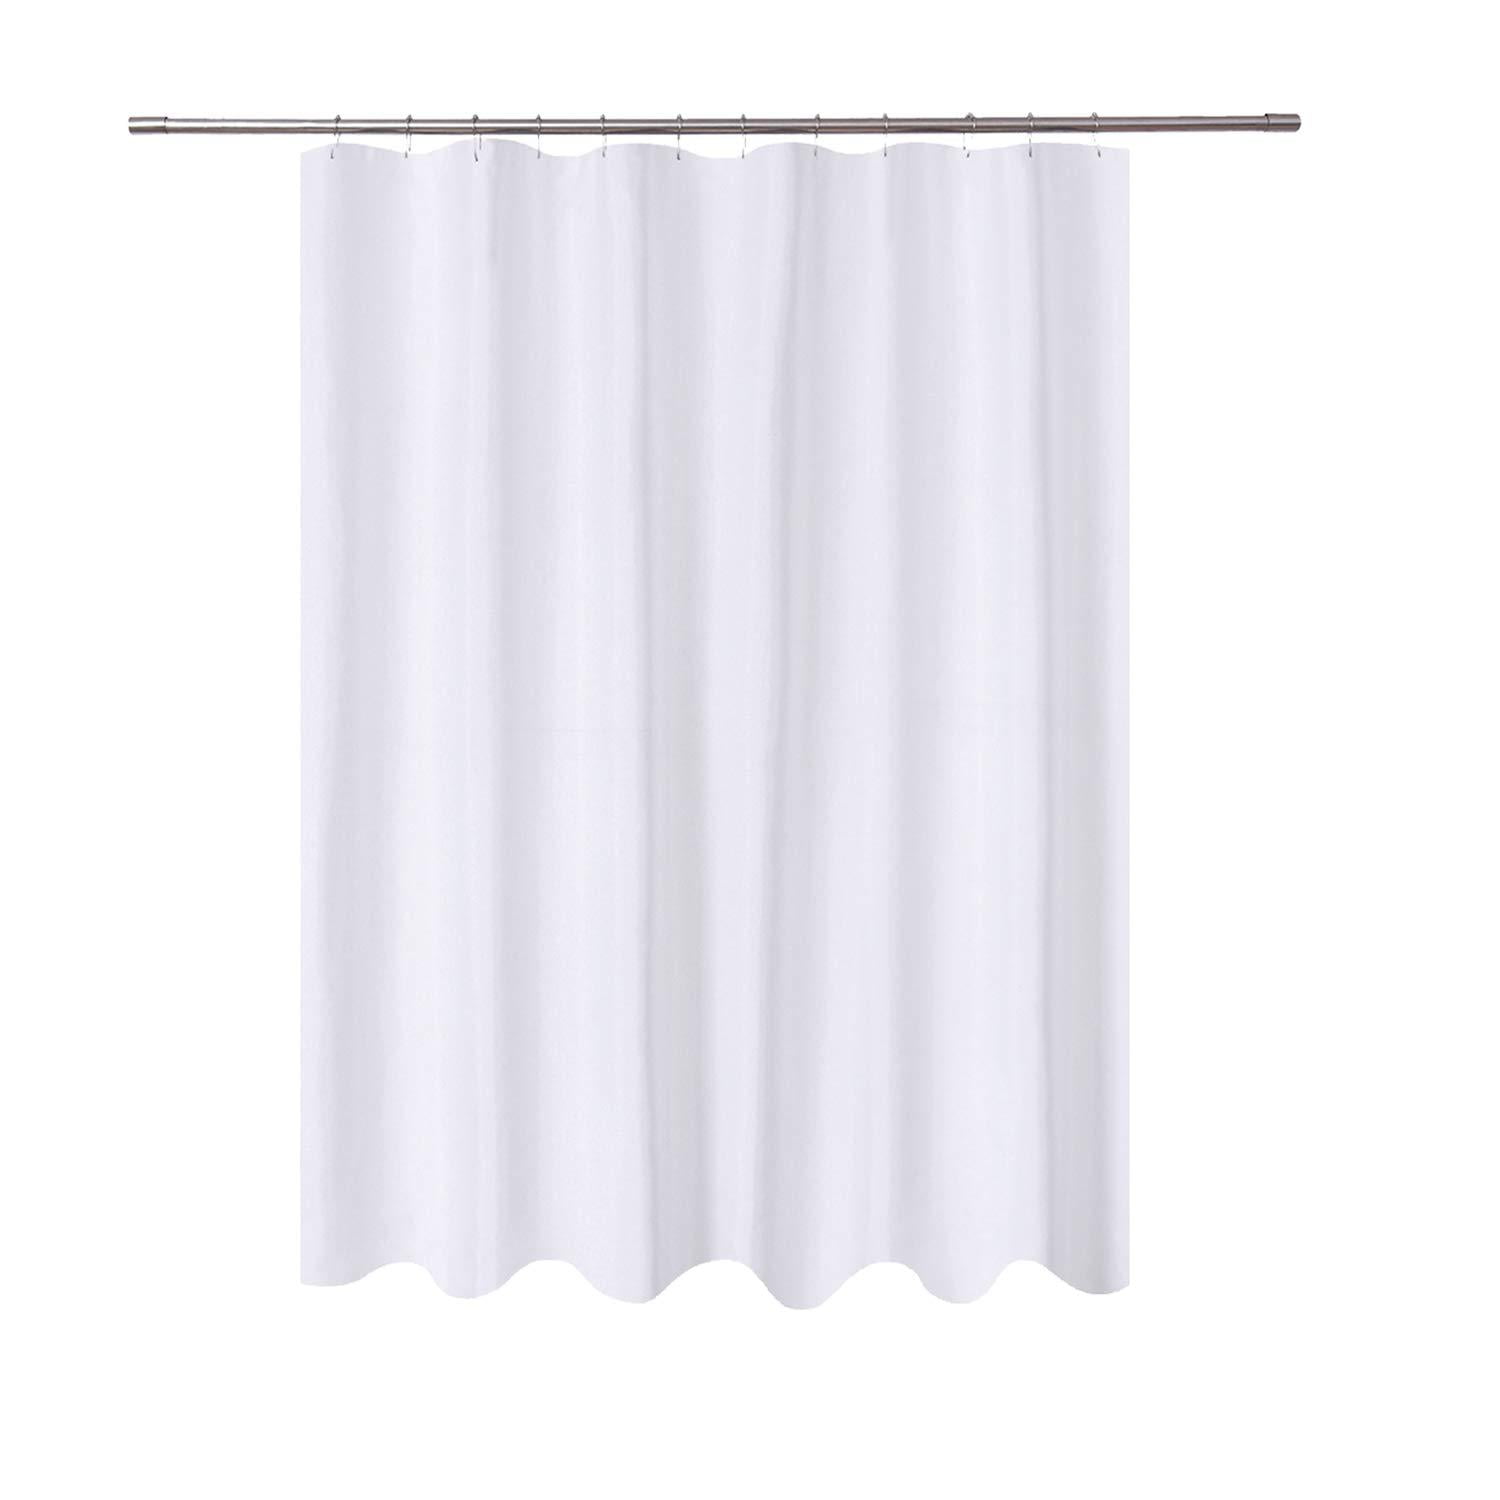 N&Y HOME Long Fabric Shower Curtain Liner 72 x 78 inches Longer Length ...